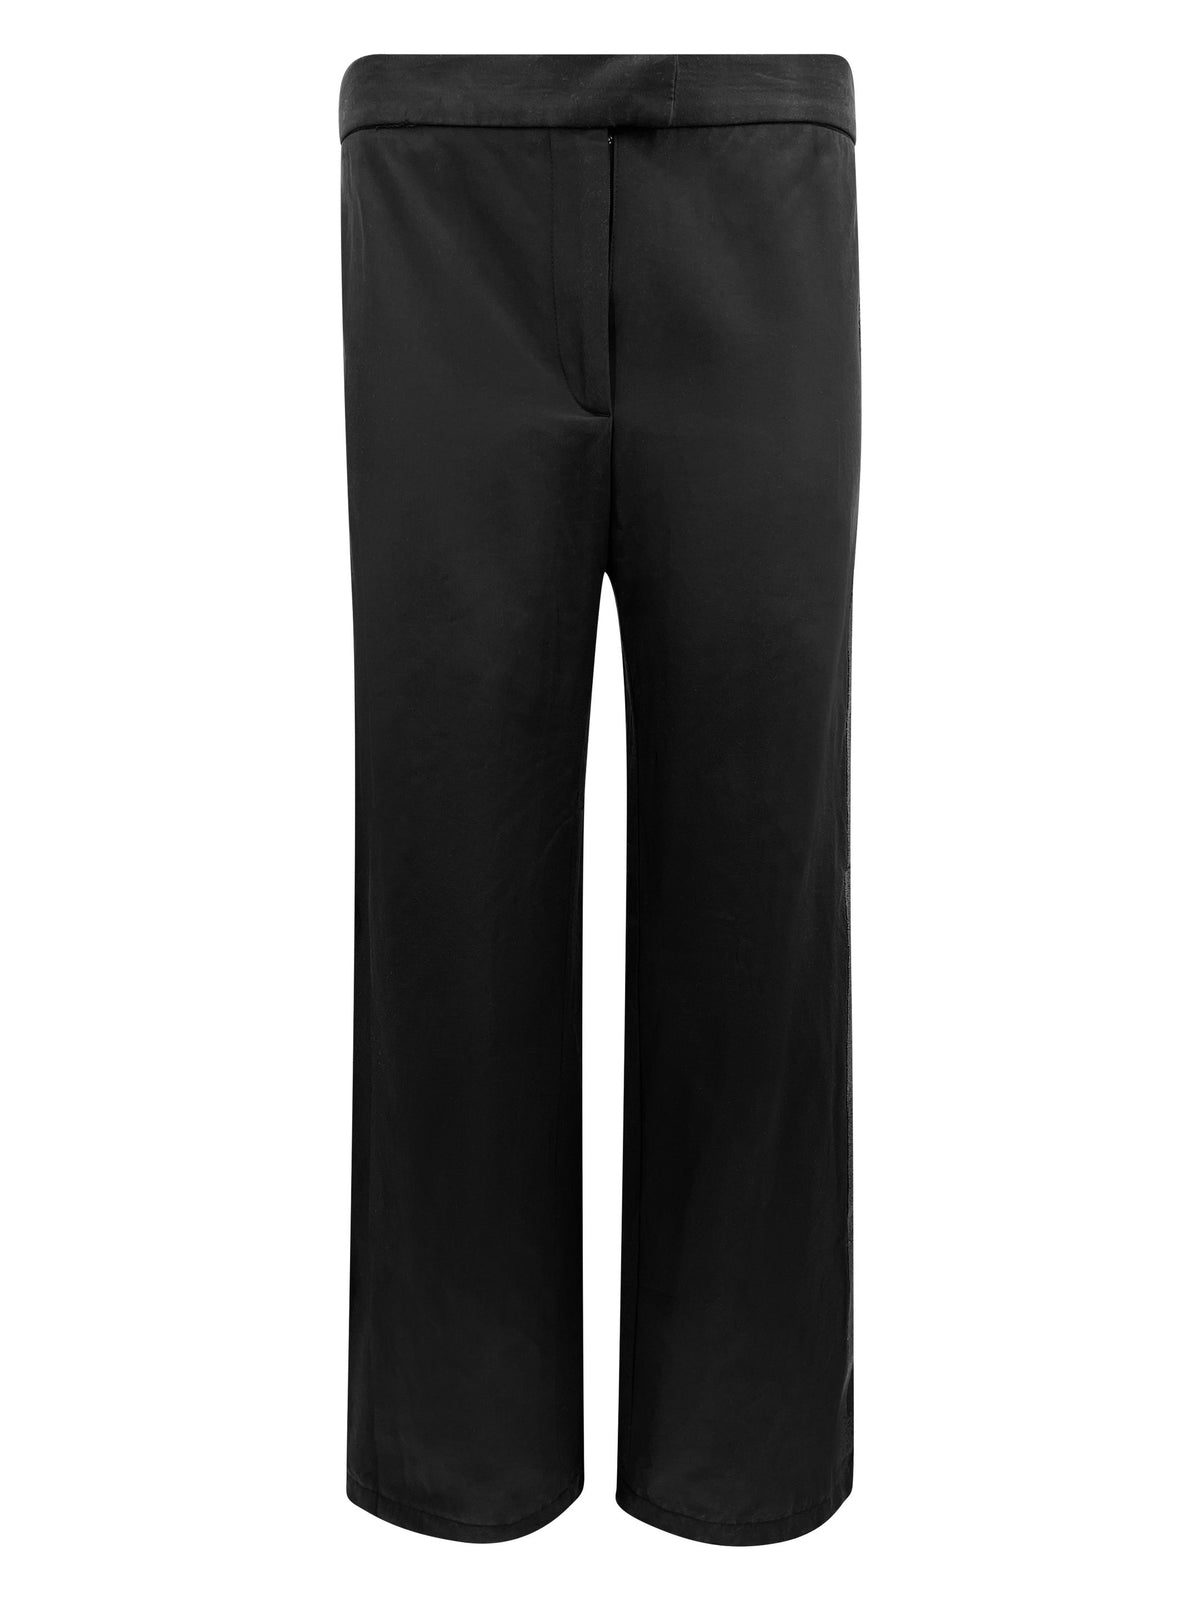 2000's Fendi Sequin Trim Trousers - ONFEMME By Lindsey's Kloset